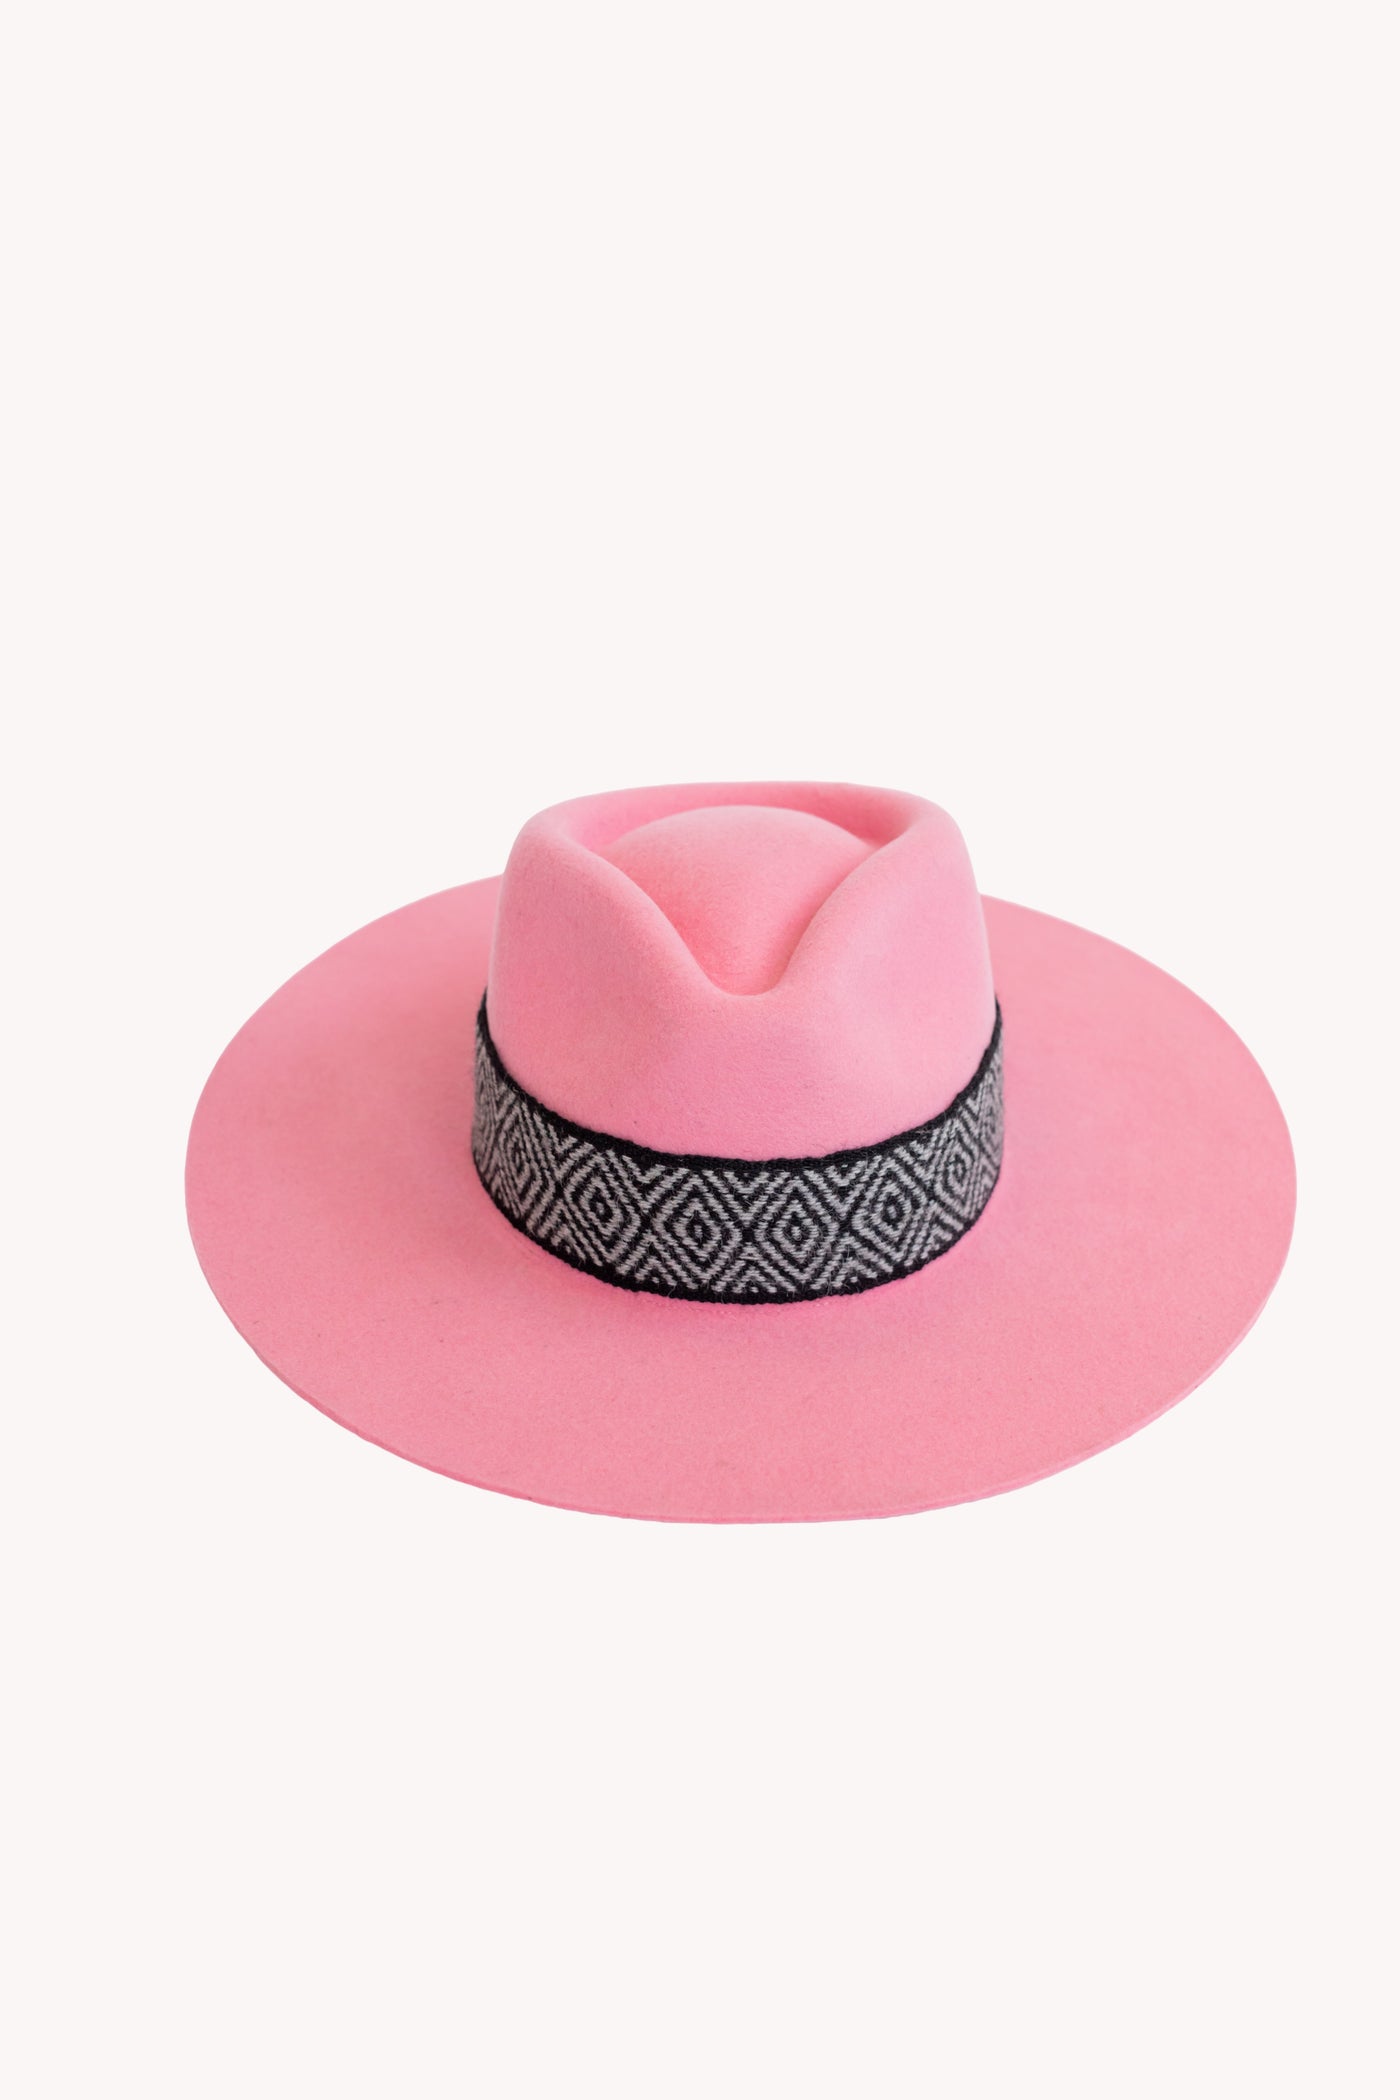 pink western style hat